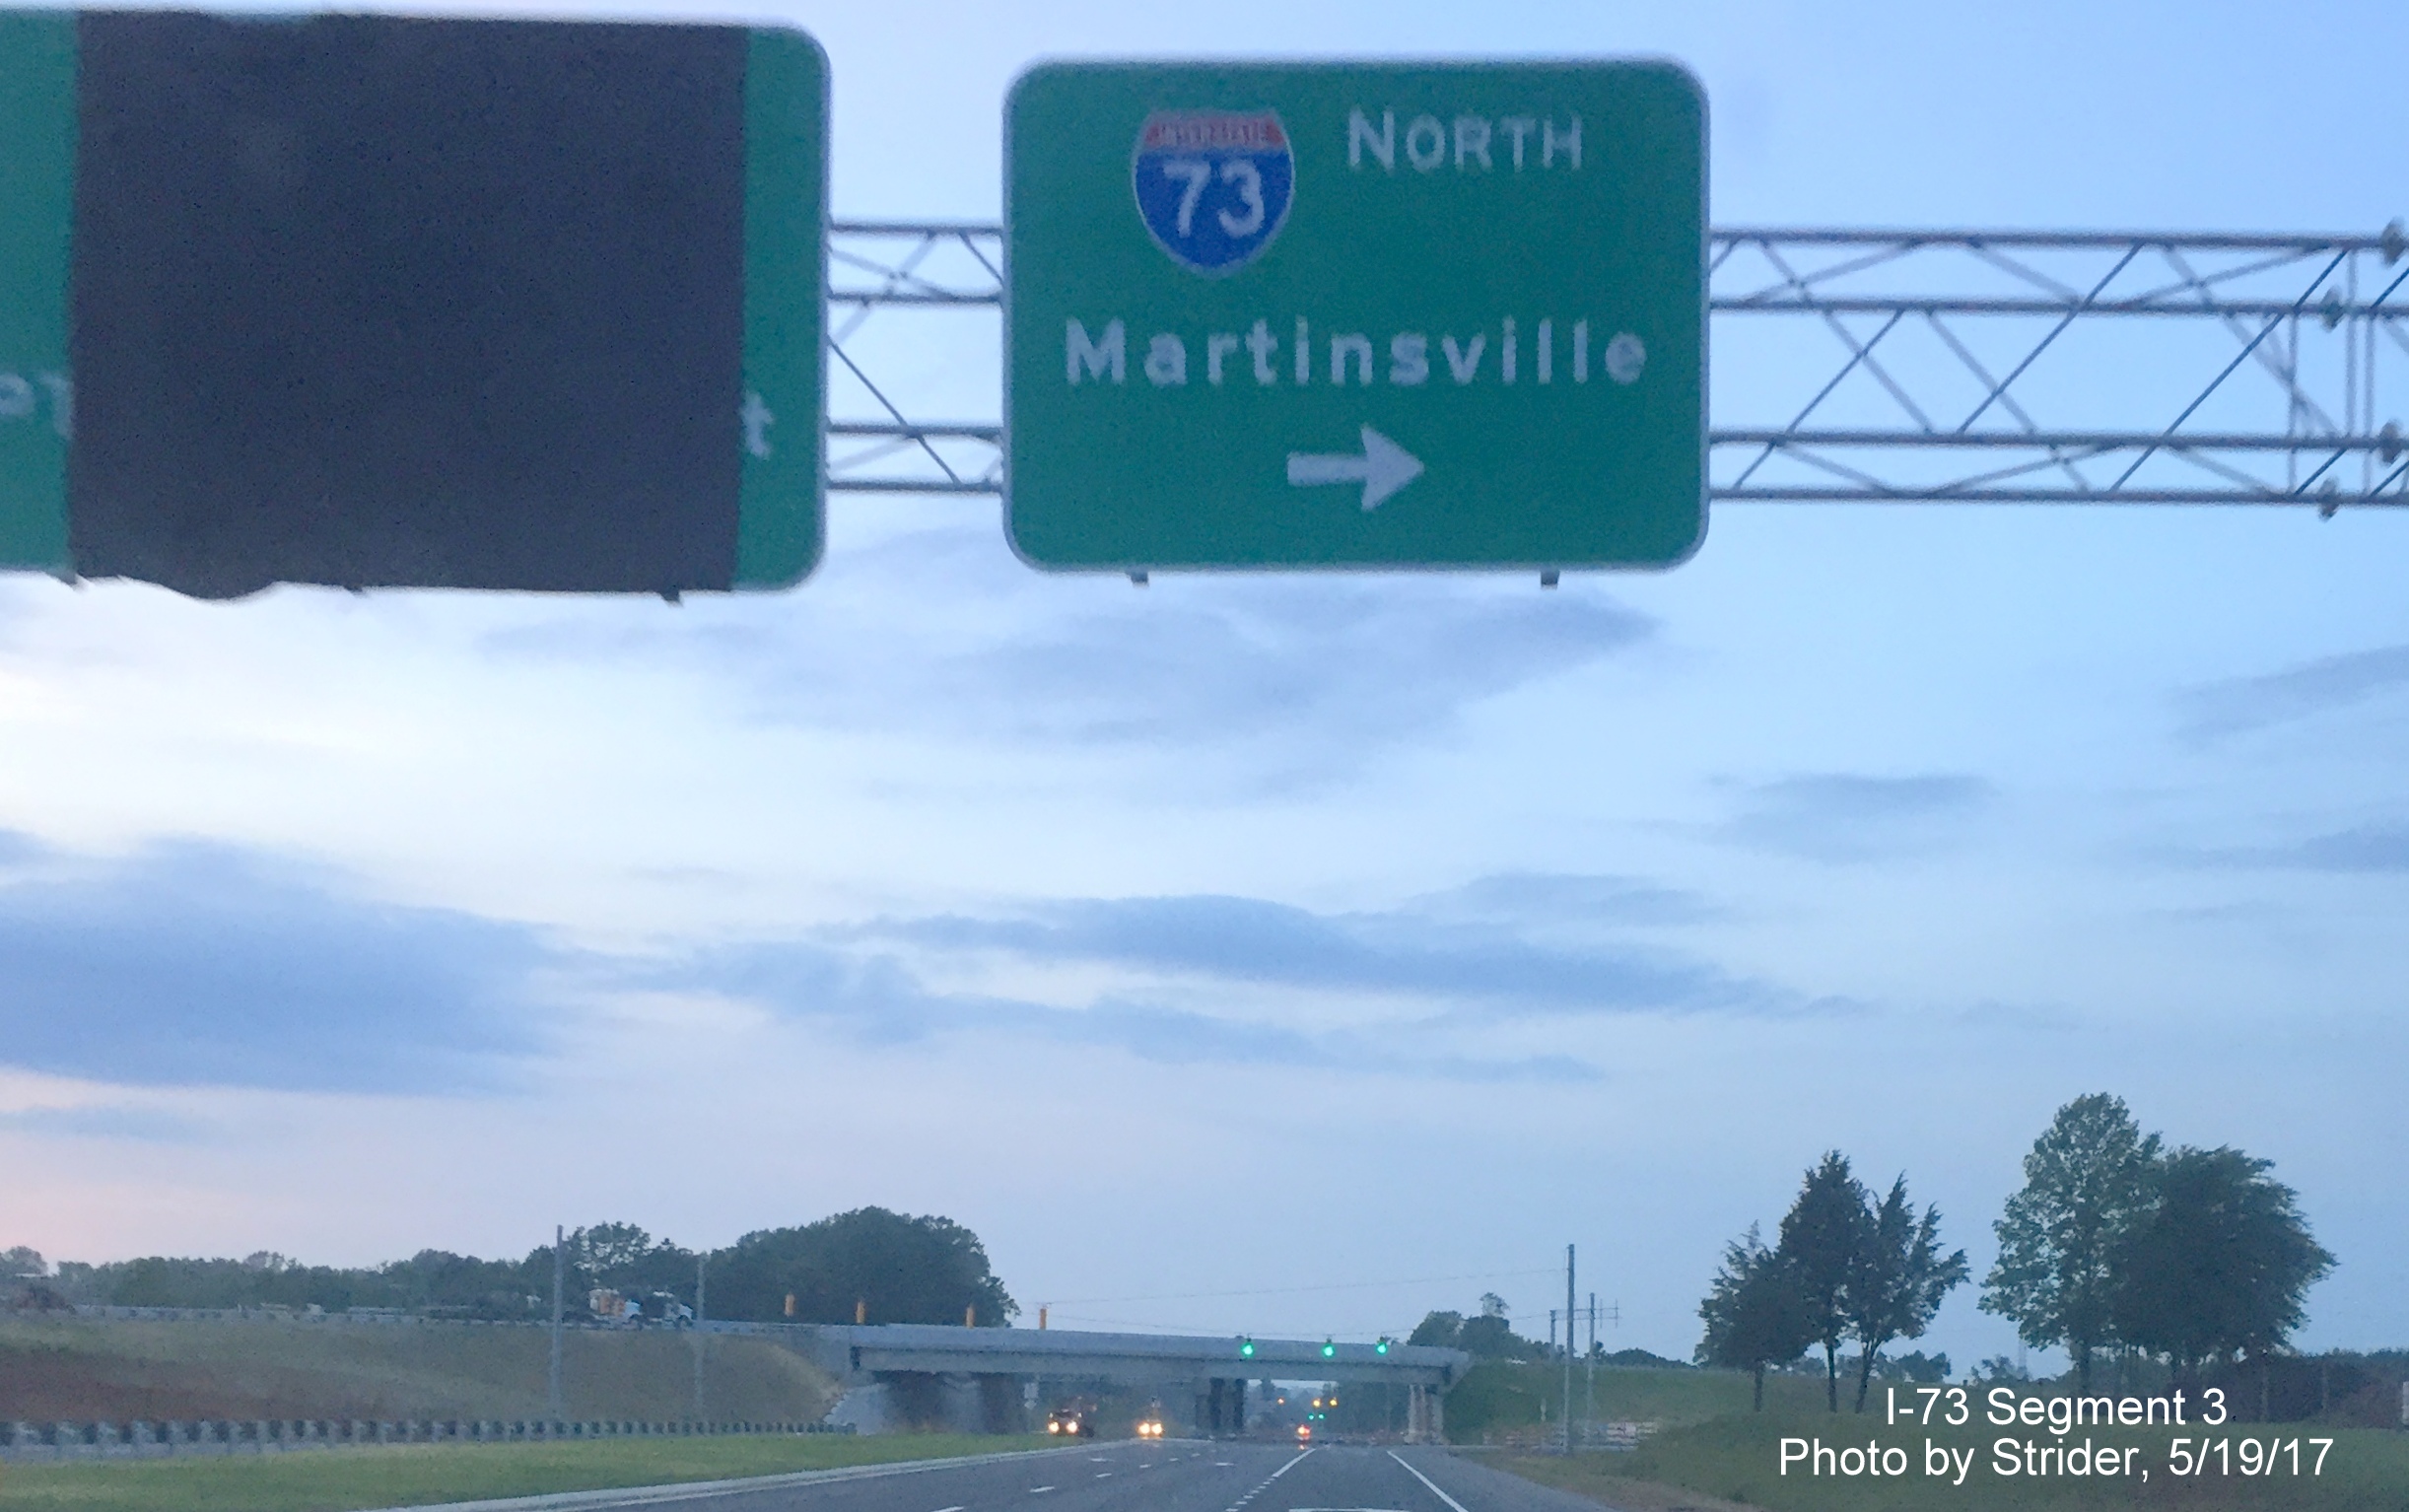 Image taken of overhead guide sign on NC 68 North directing traffic to the newly opened I-73 North, by Strider